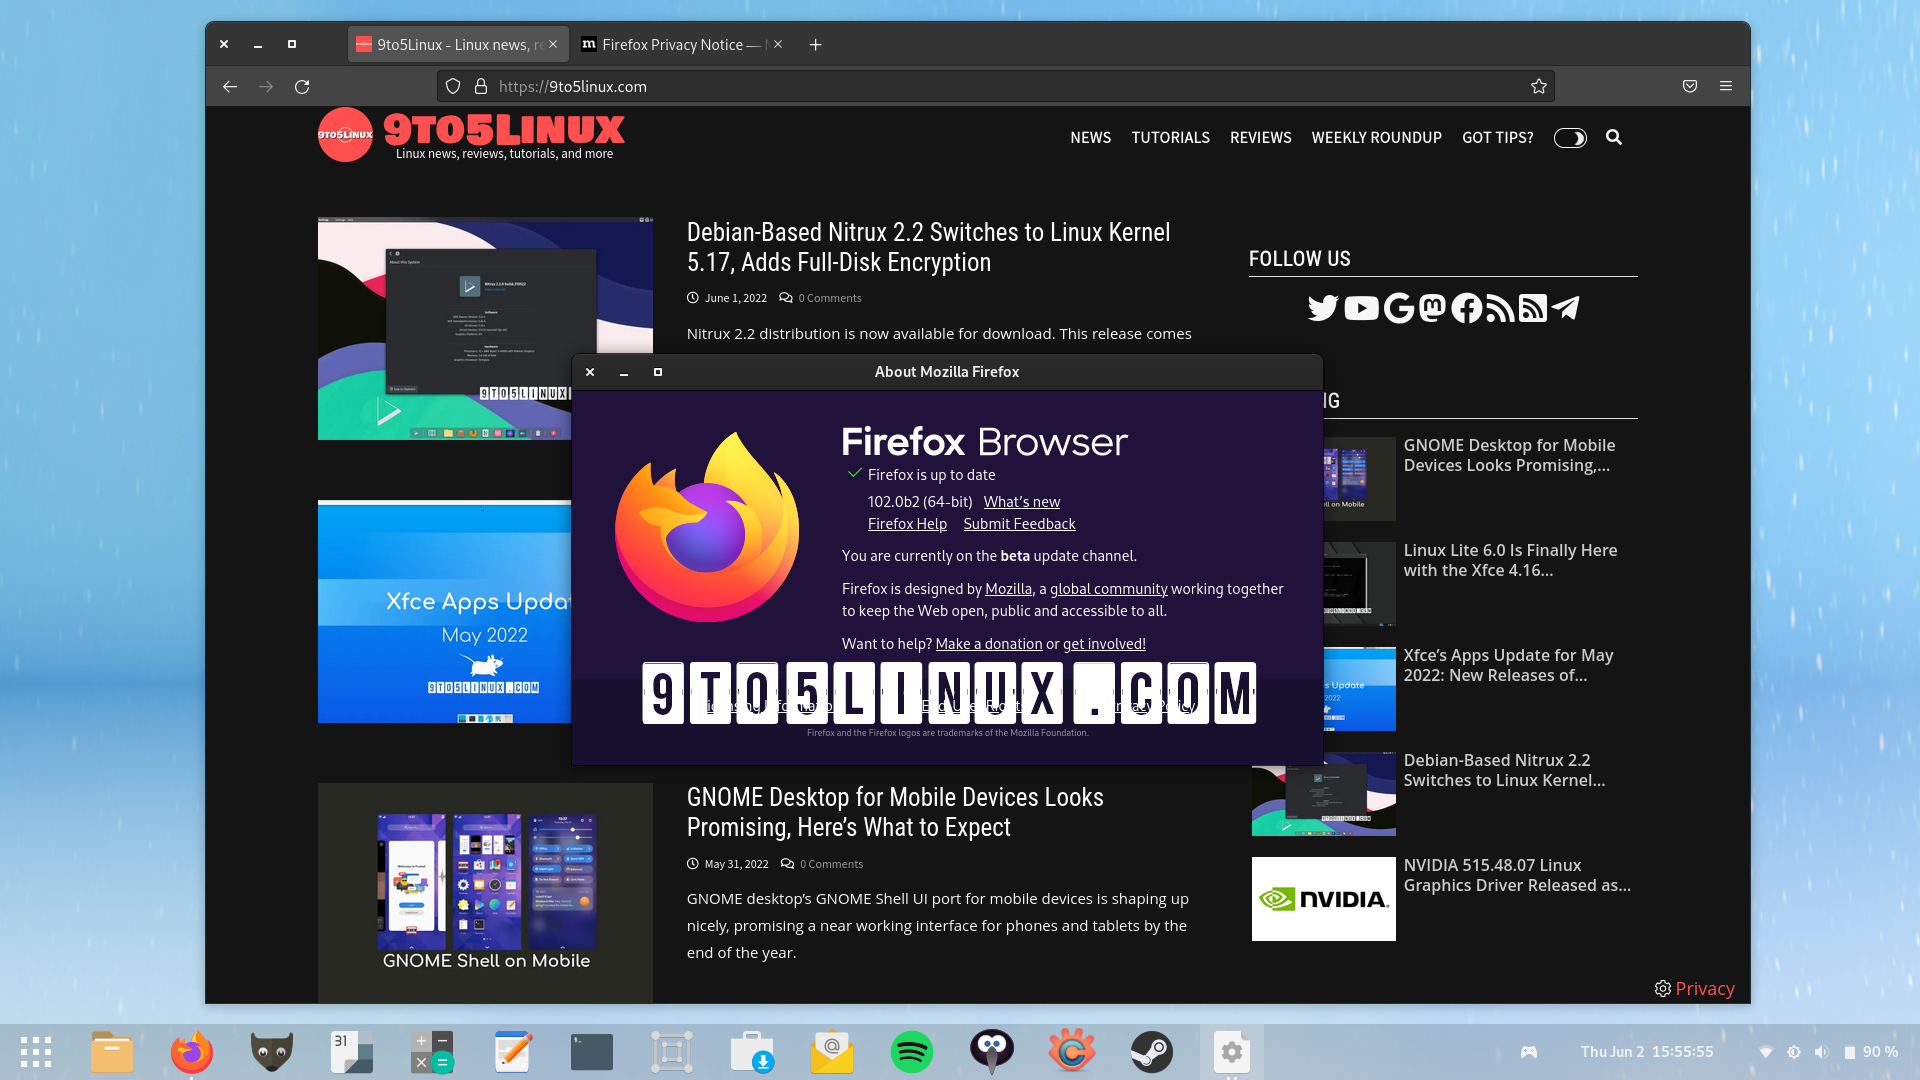 Firefox 102 Enters Beta Testing with Geoclue Support on Linux, Improved PDF Reading